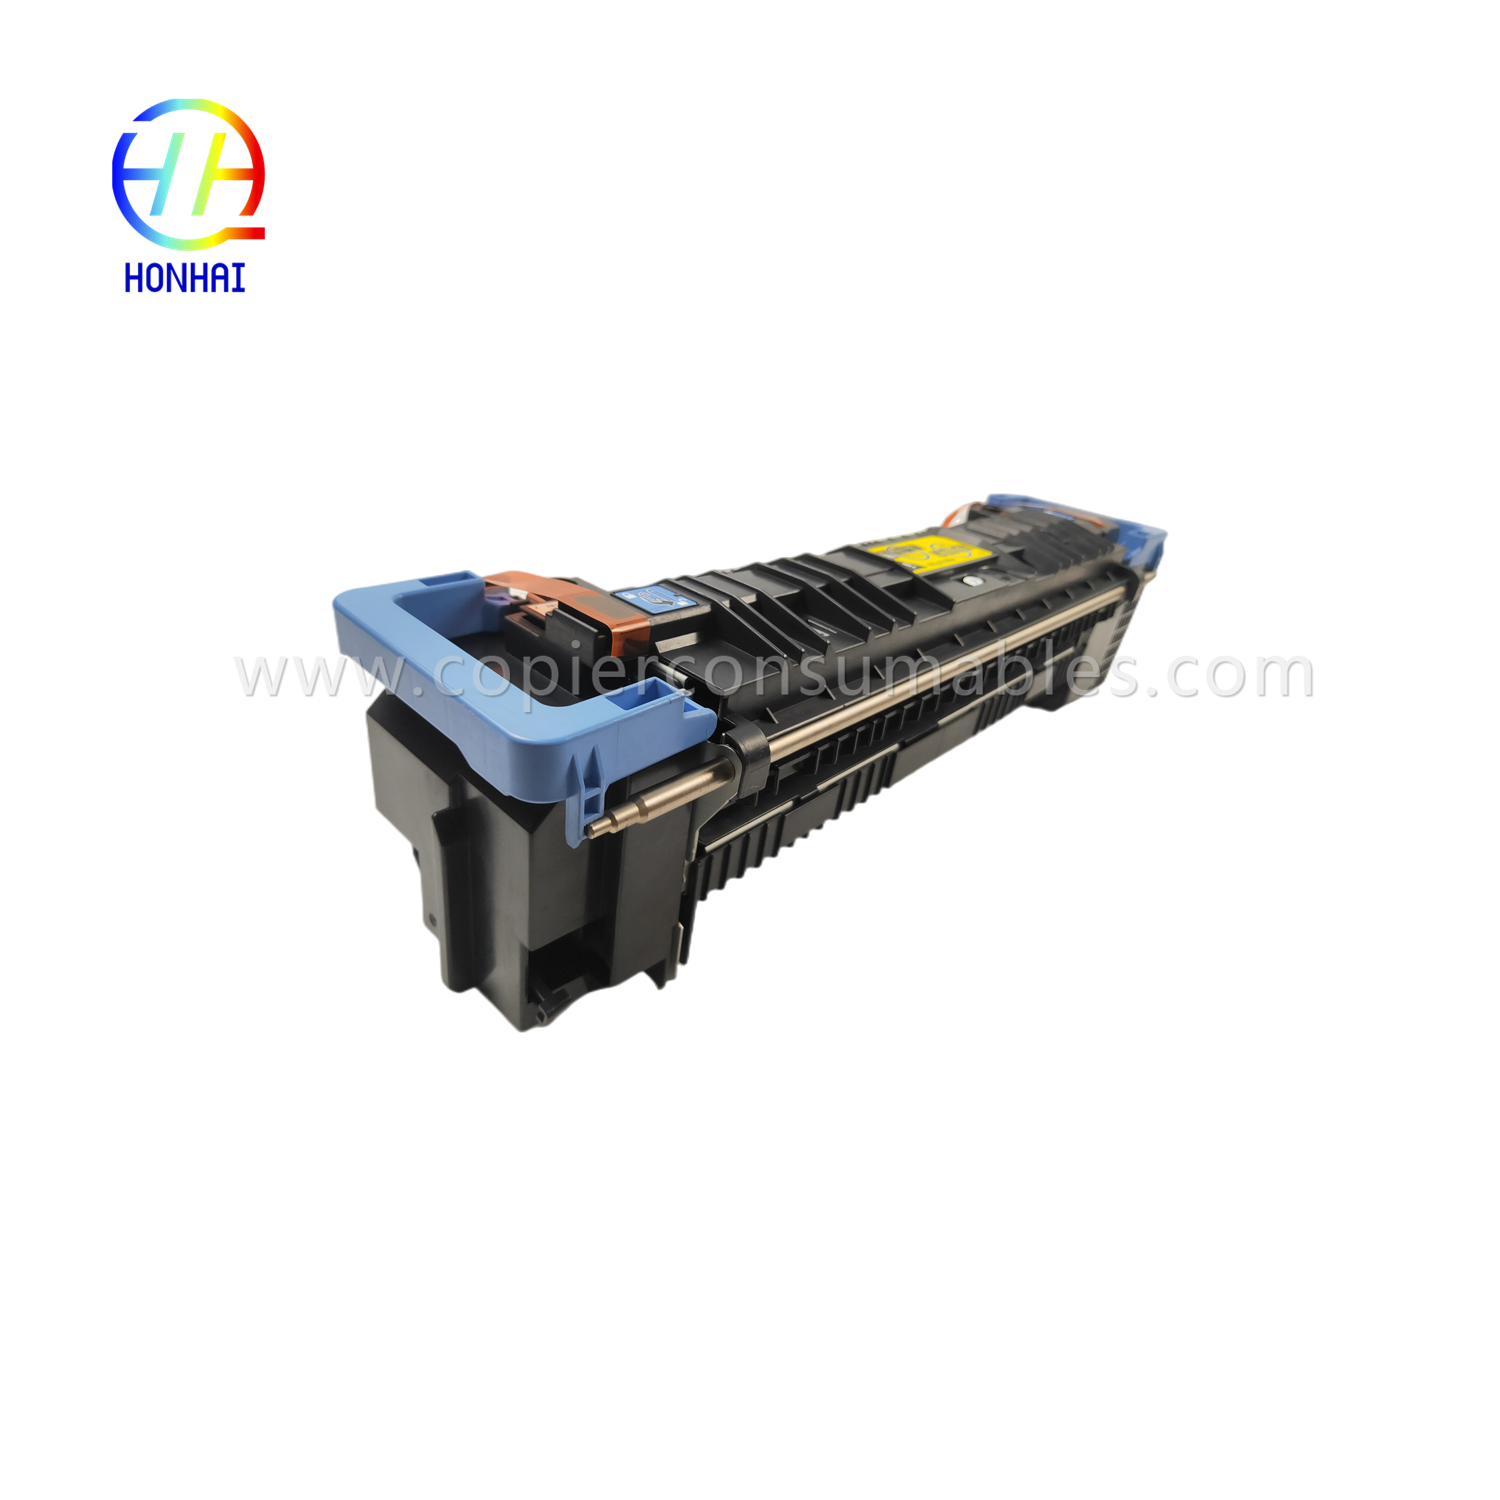 https://www.copierconsumables.com/fuser-assembly-unit-for-hp-m855-m880-m855dn-m855xh-m880z-m880z-c1n54-67901-c1n58-67901-fusing-heating-product/-assy